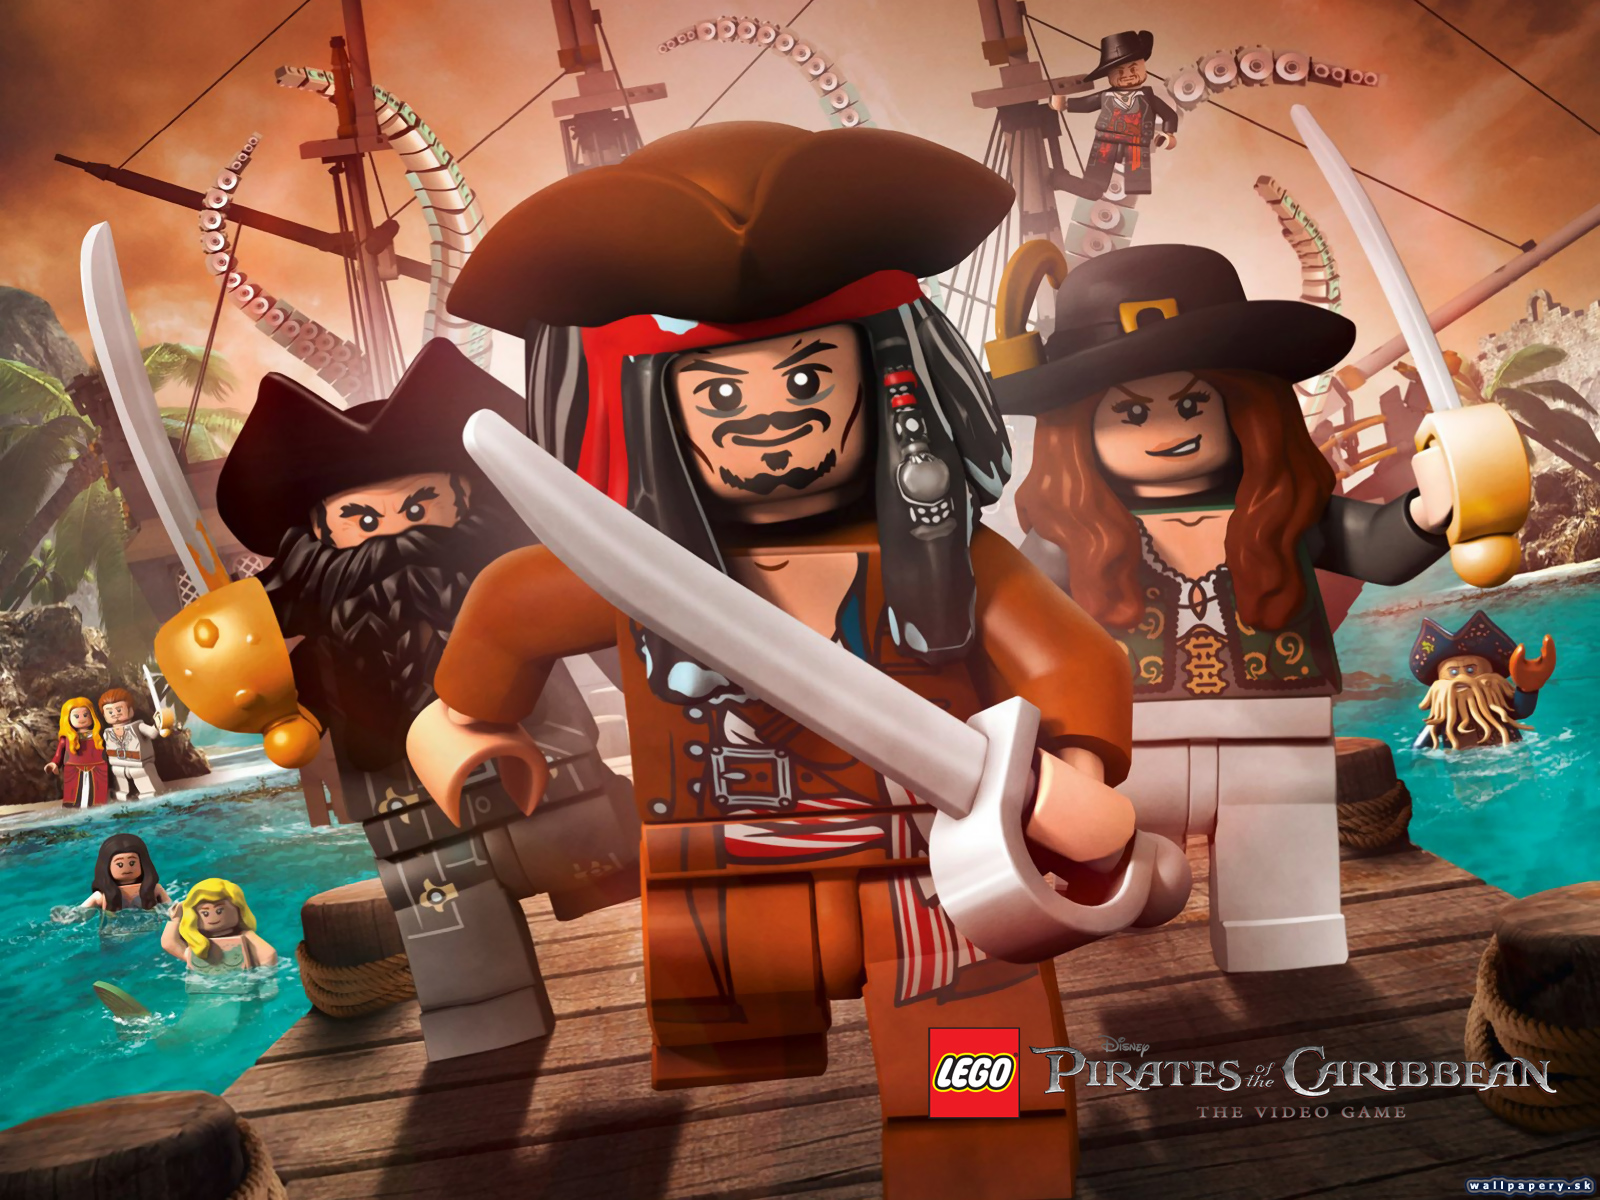 Lego Pirates of the Caribbean: The Video Game - wallpaper 1